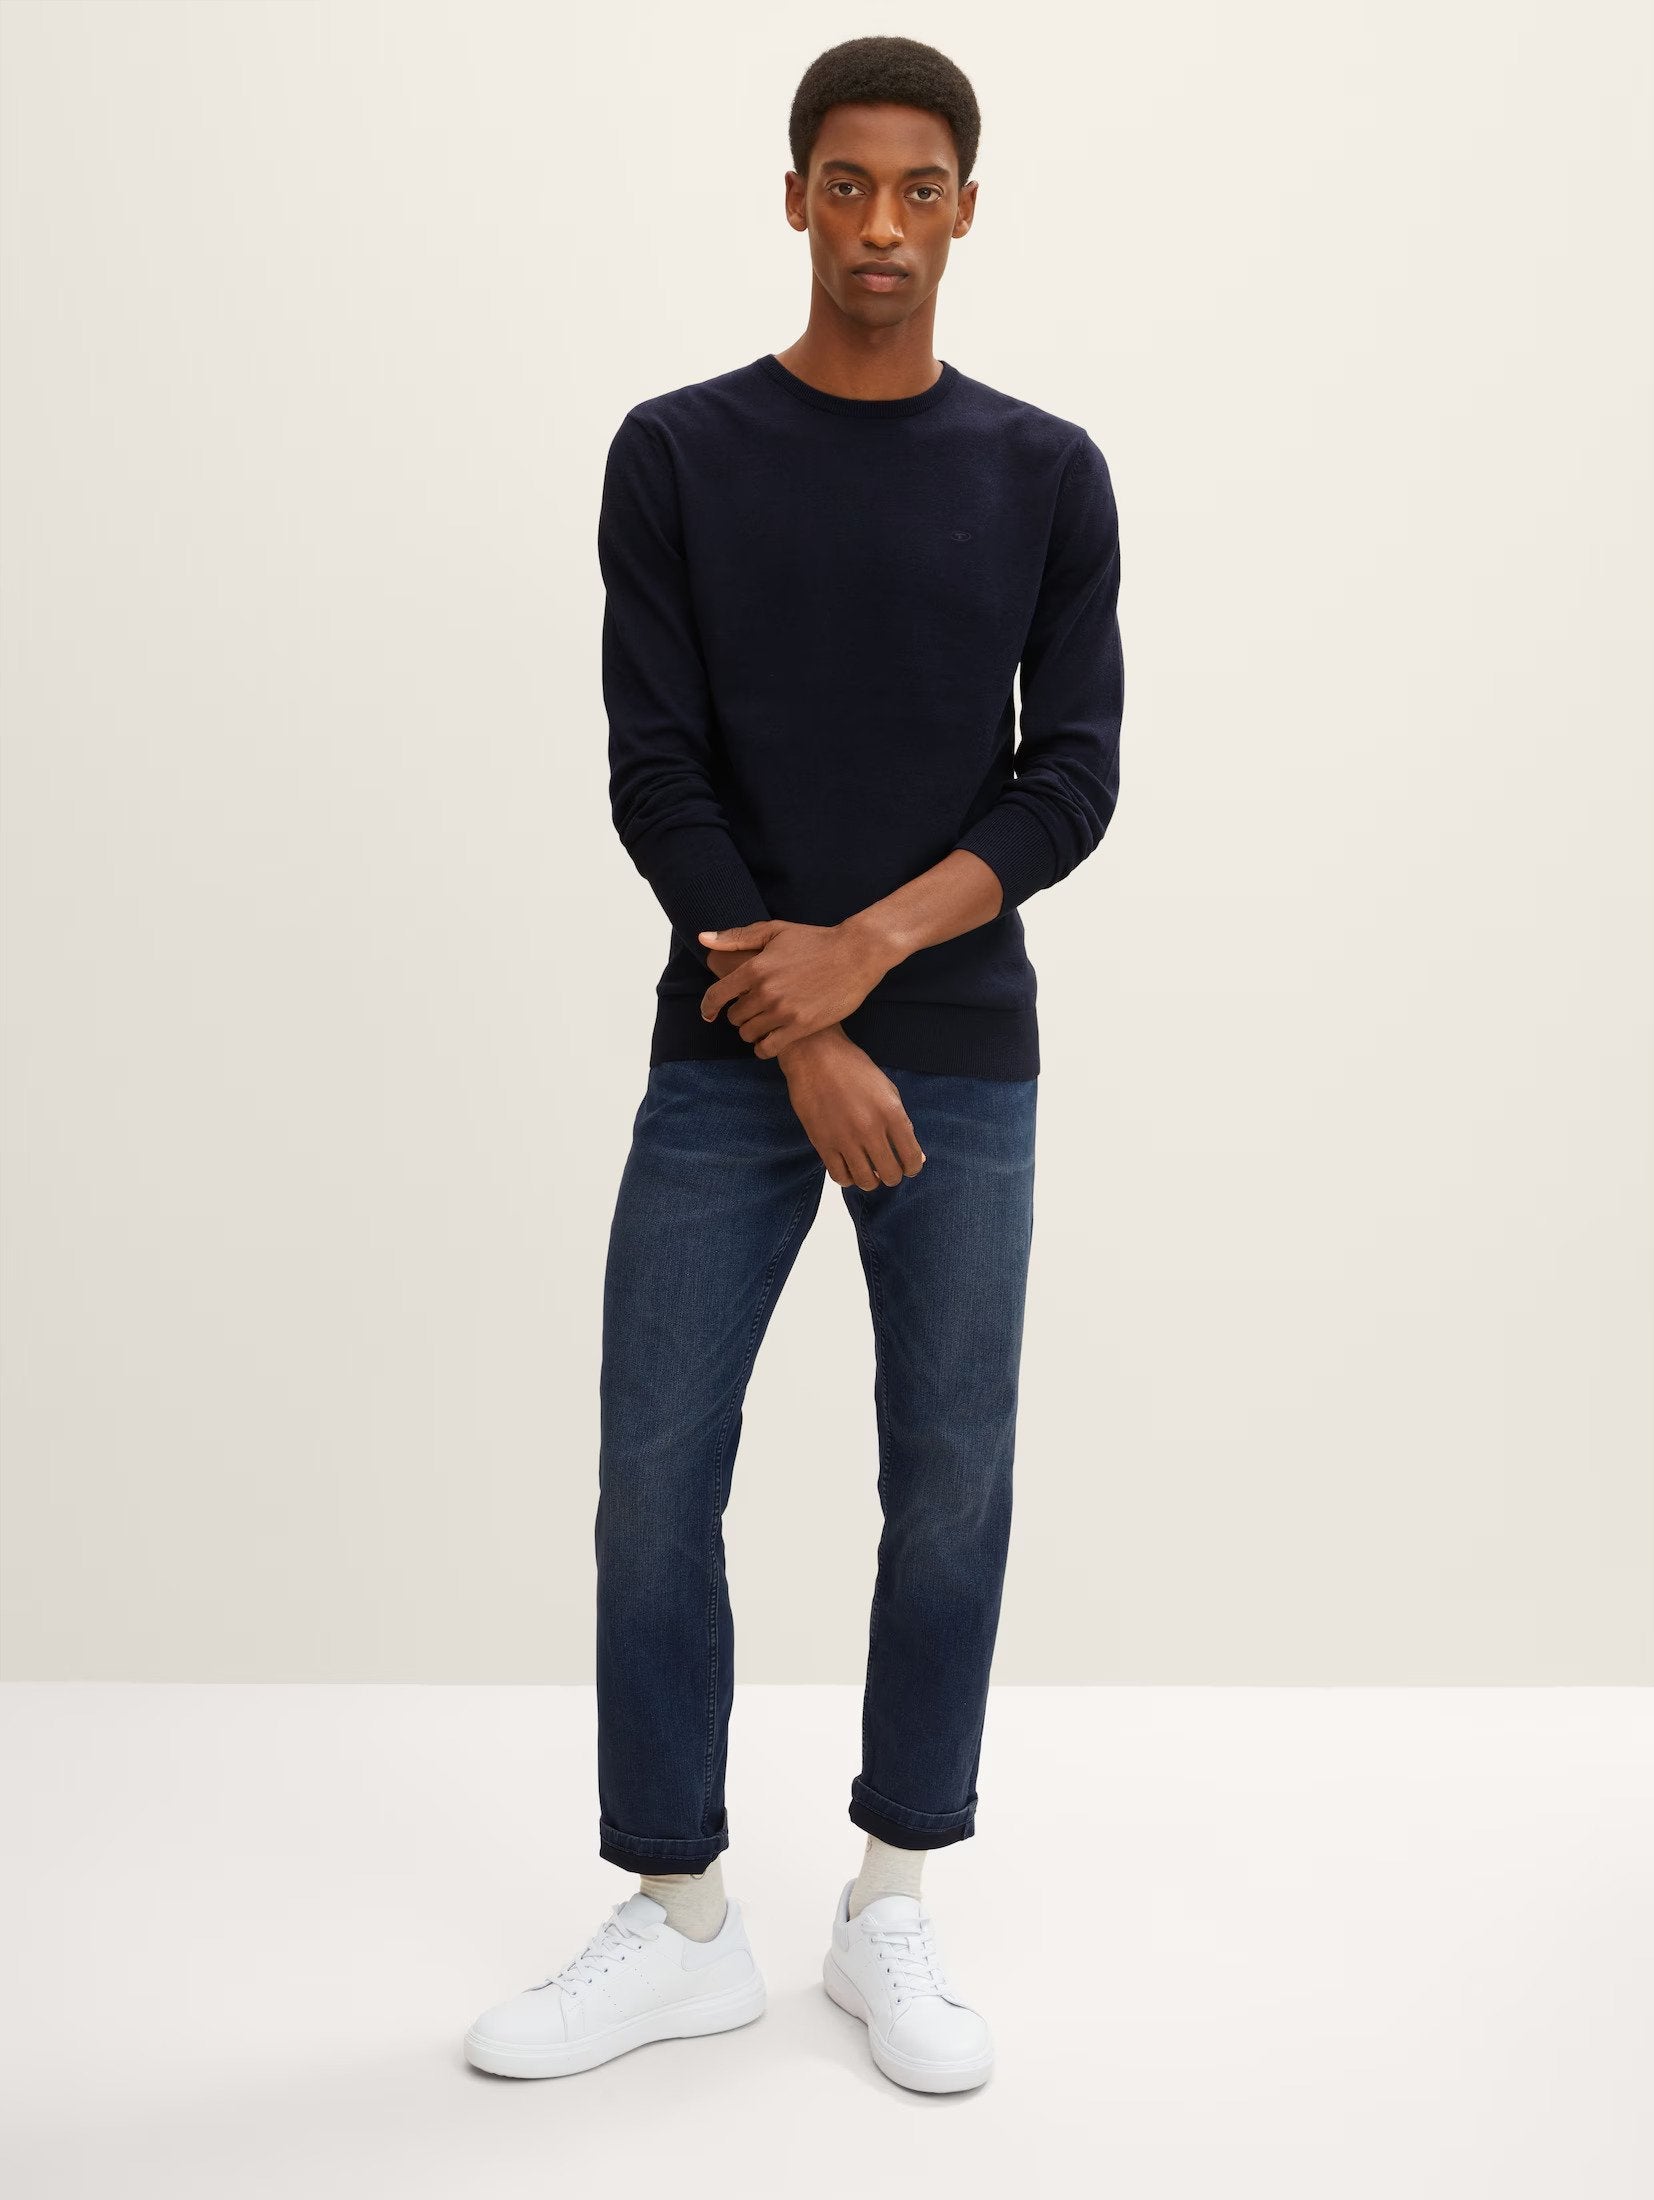 Tom Tailor Simple Knitted Navy Jumper